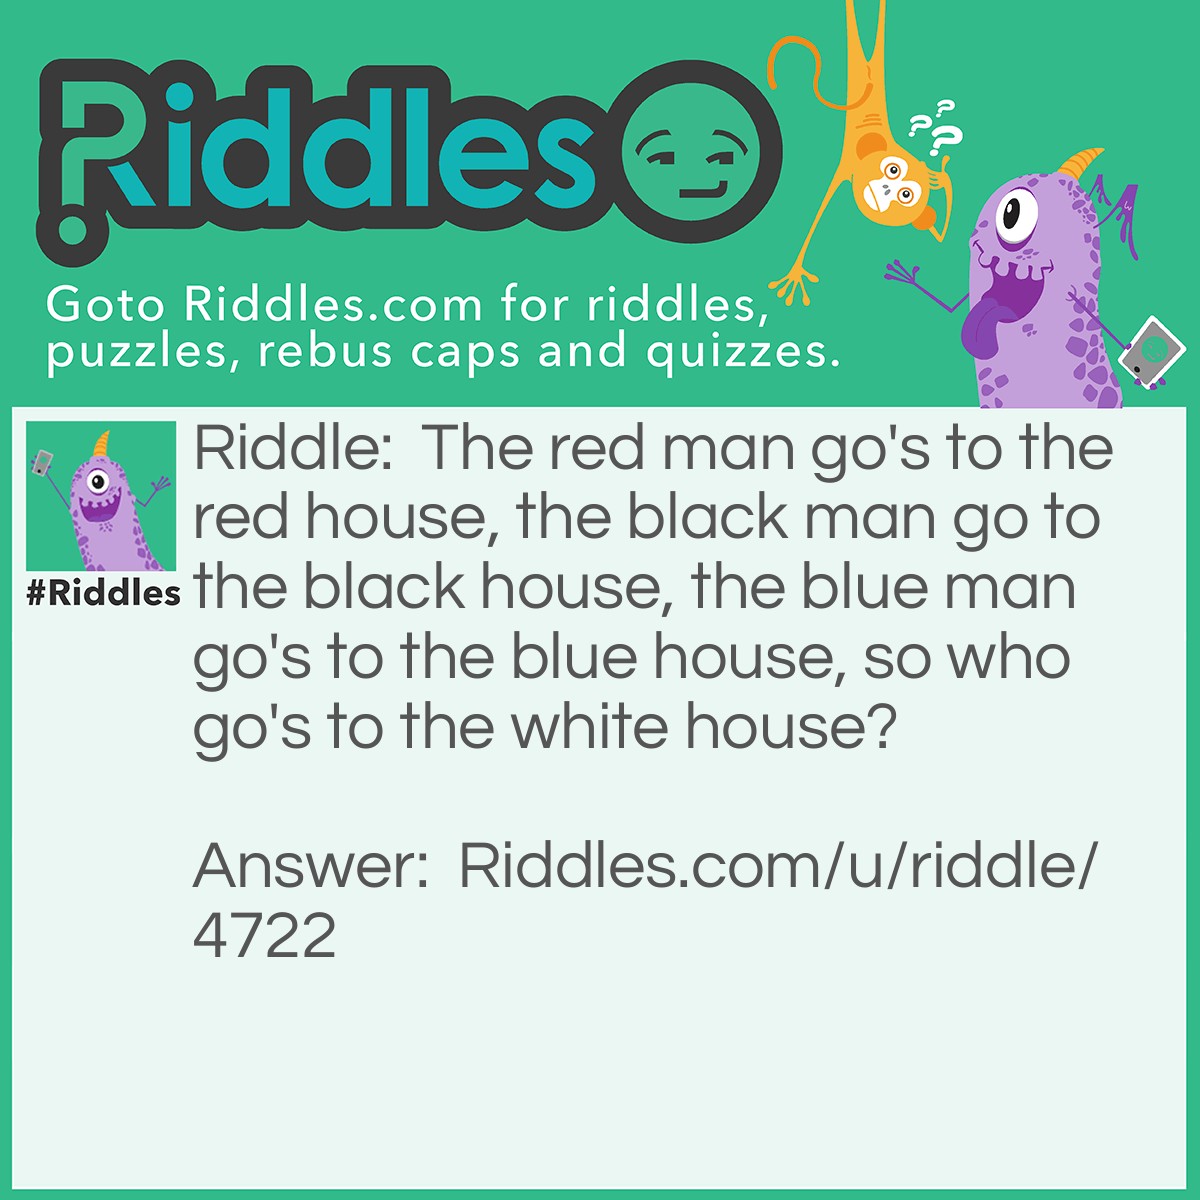 Riddle: The red man go's to the red house, the black man go to the black house, the blue man go's to the blue house, so who go's to the white house? Answer: The president go's to the white house.